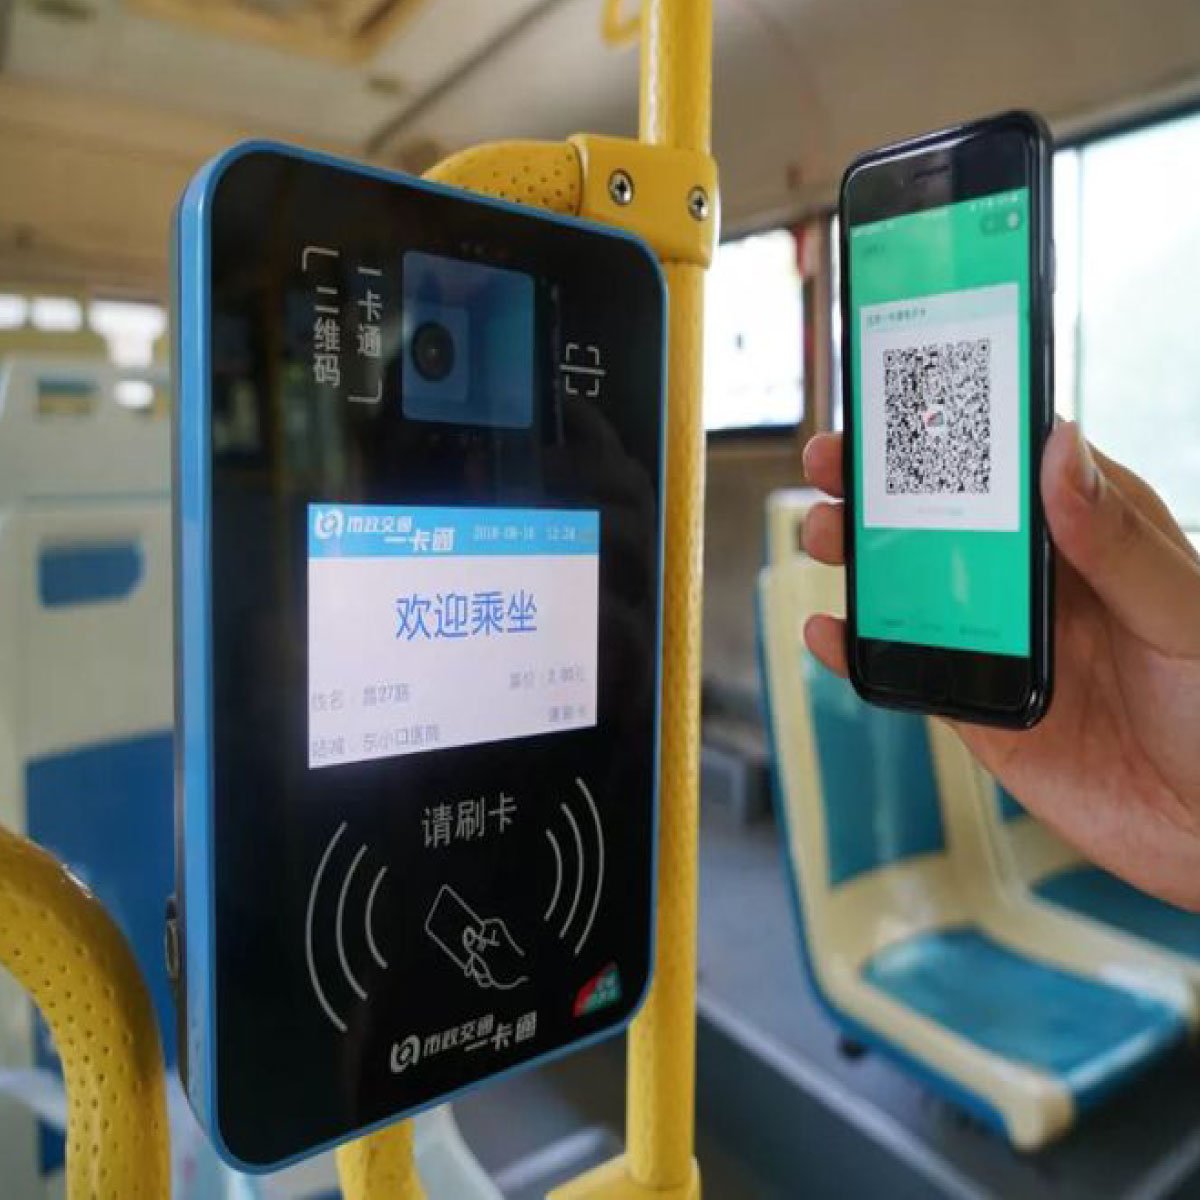 Smart Bus Ticketing System using Qr Code Android